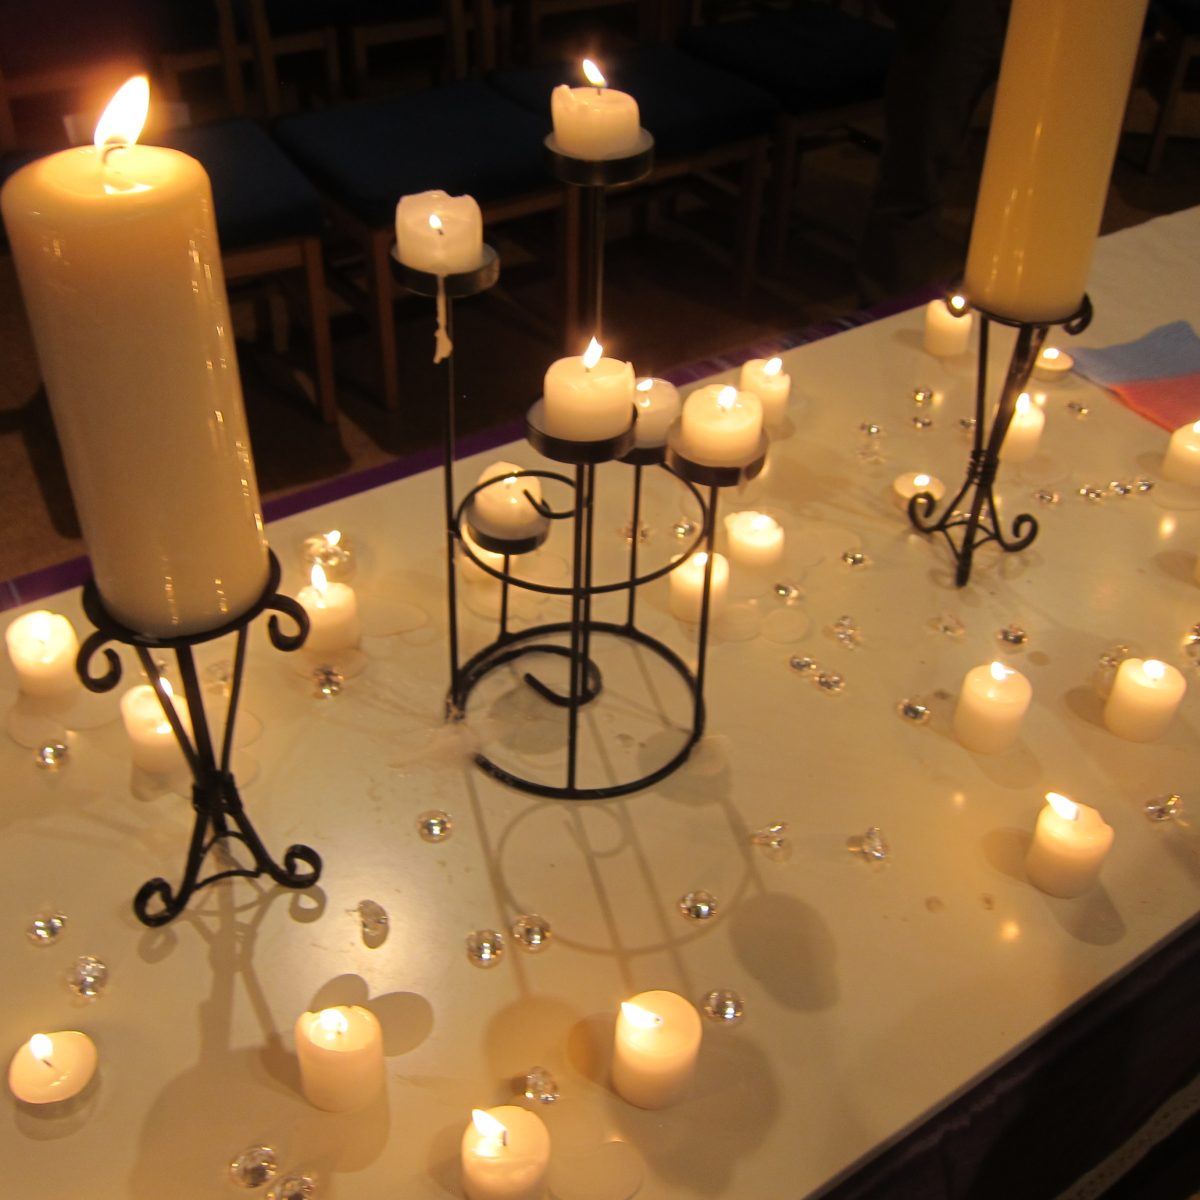 Transgender Day of Remembrance candle display